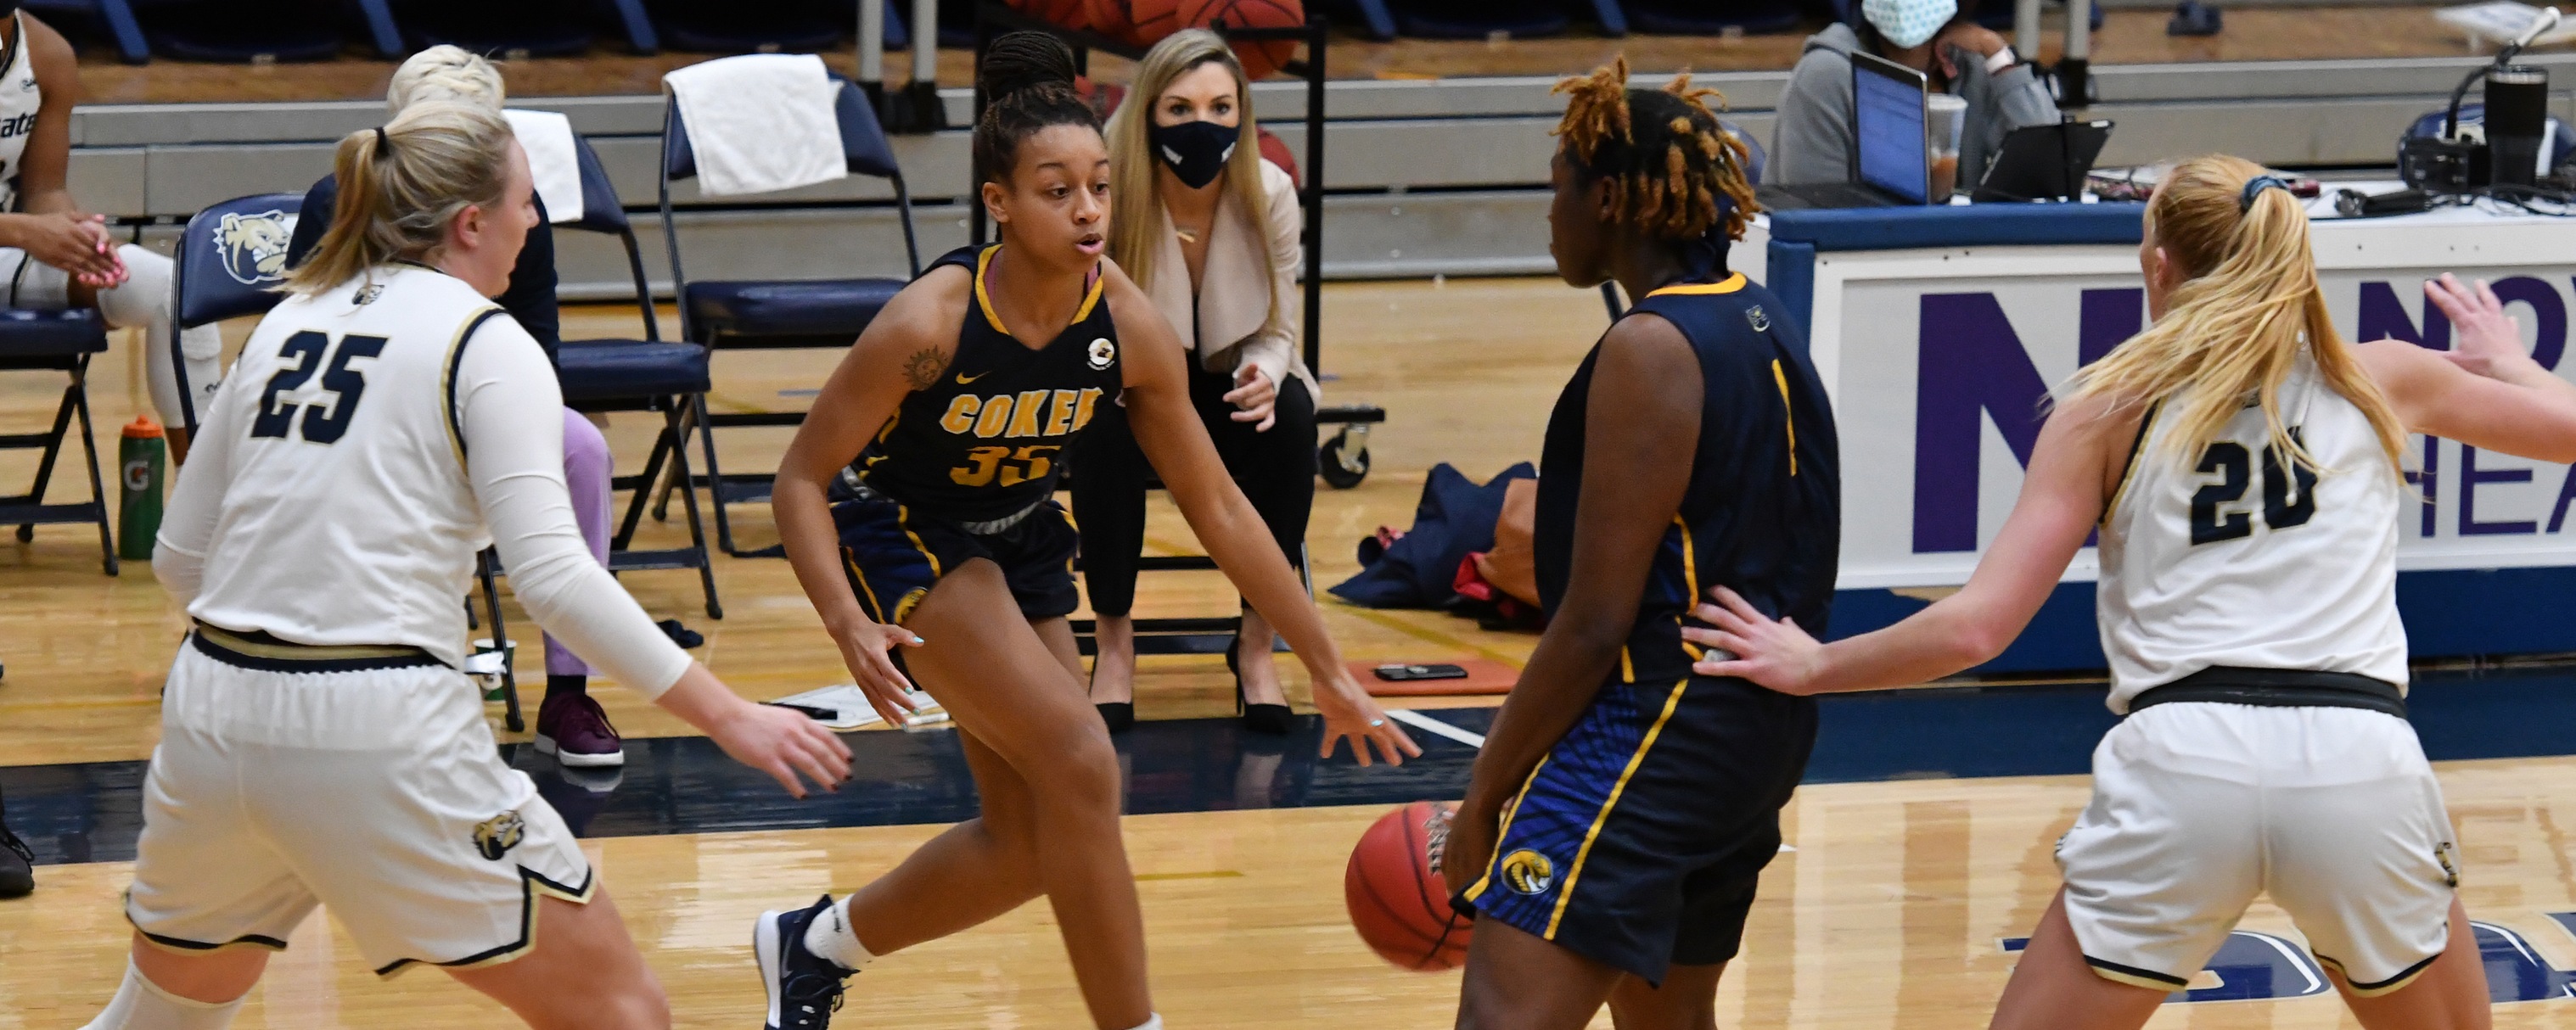 Women's Basketball Drops Conference Tilt at Anderson (S.C.) on Saturday